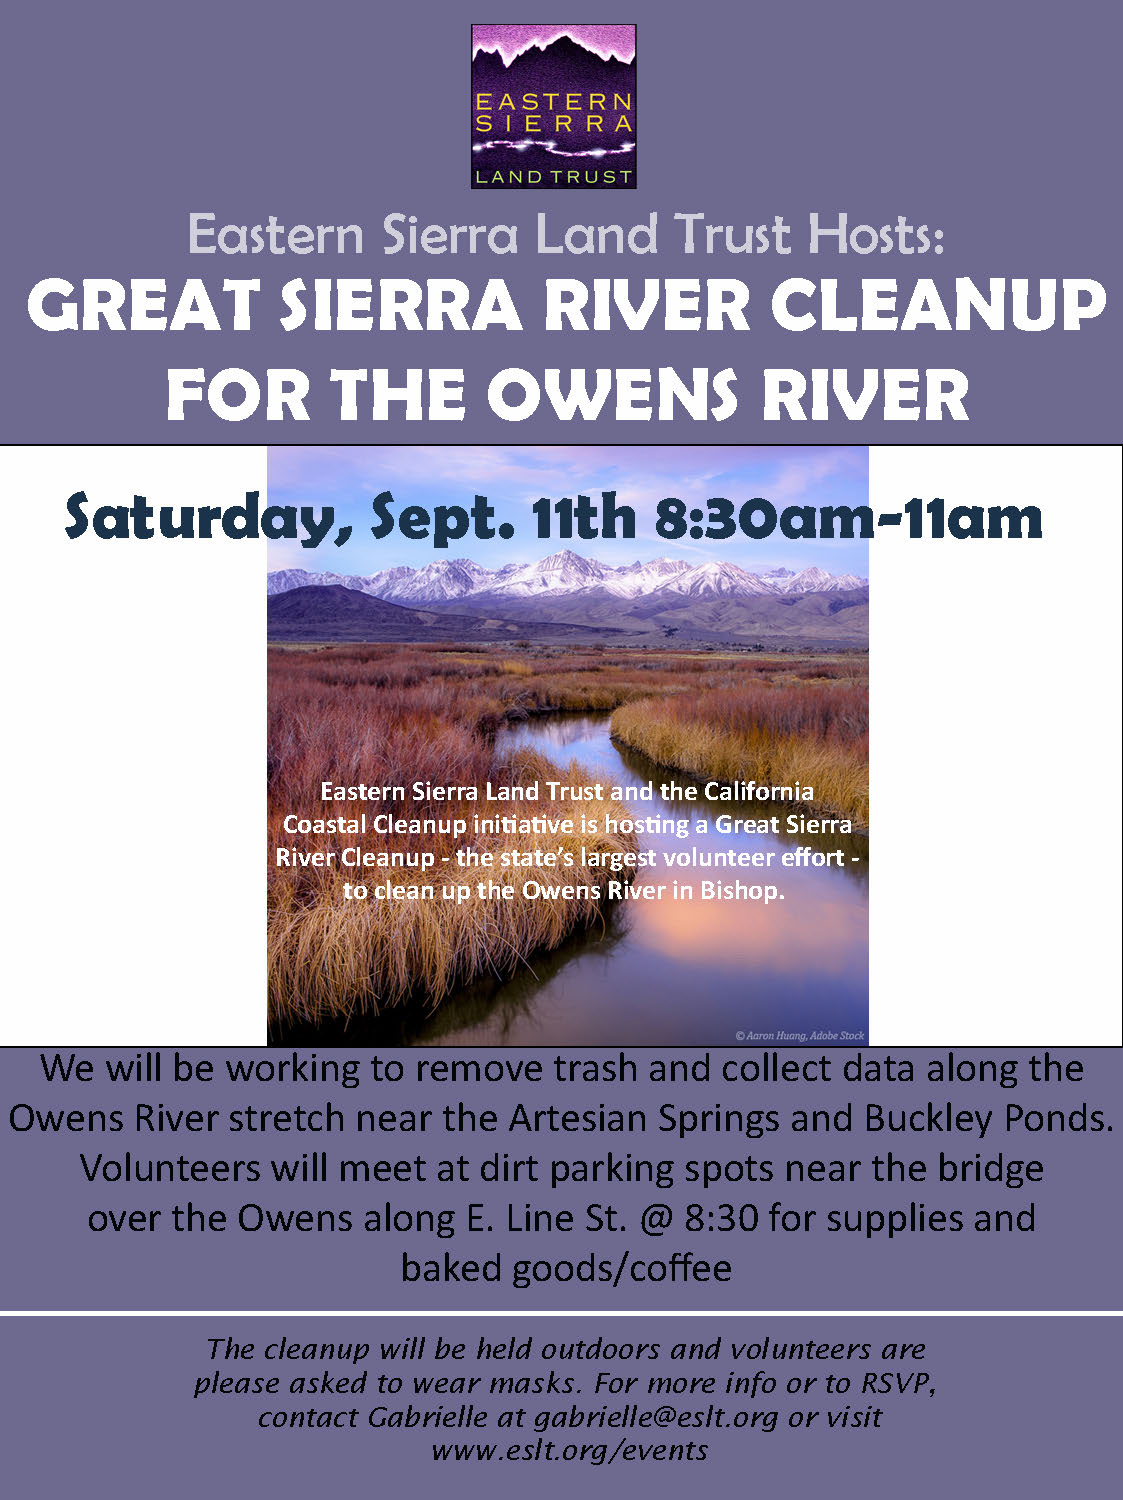 Great Sierra River Cleanup for the Owens River